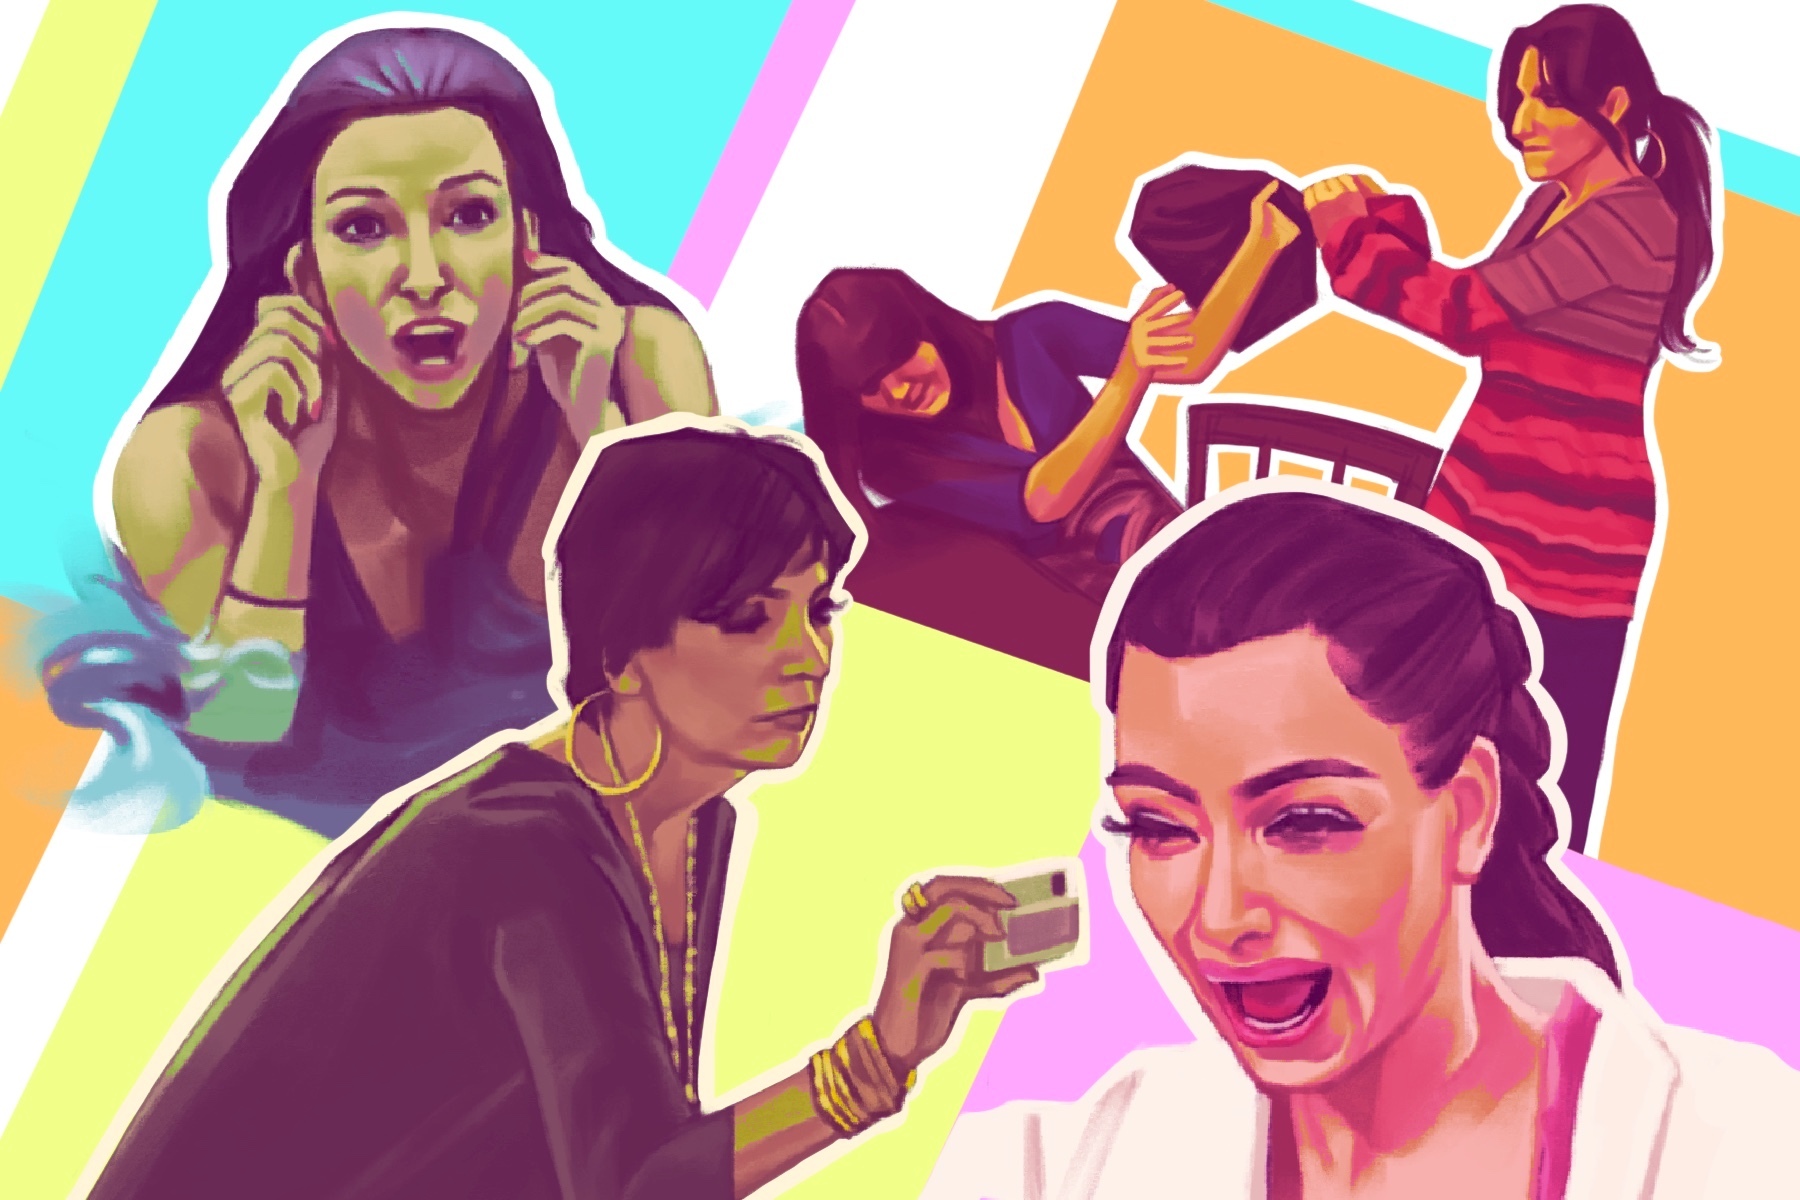 An illustration depicts some famous shots from Keeping Up With the Kardashians, featuring several of the Kardashian women.